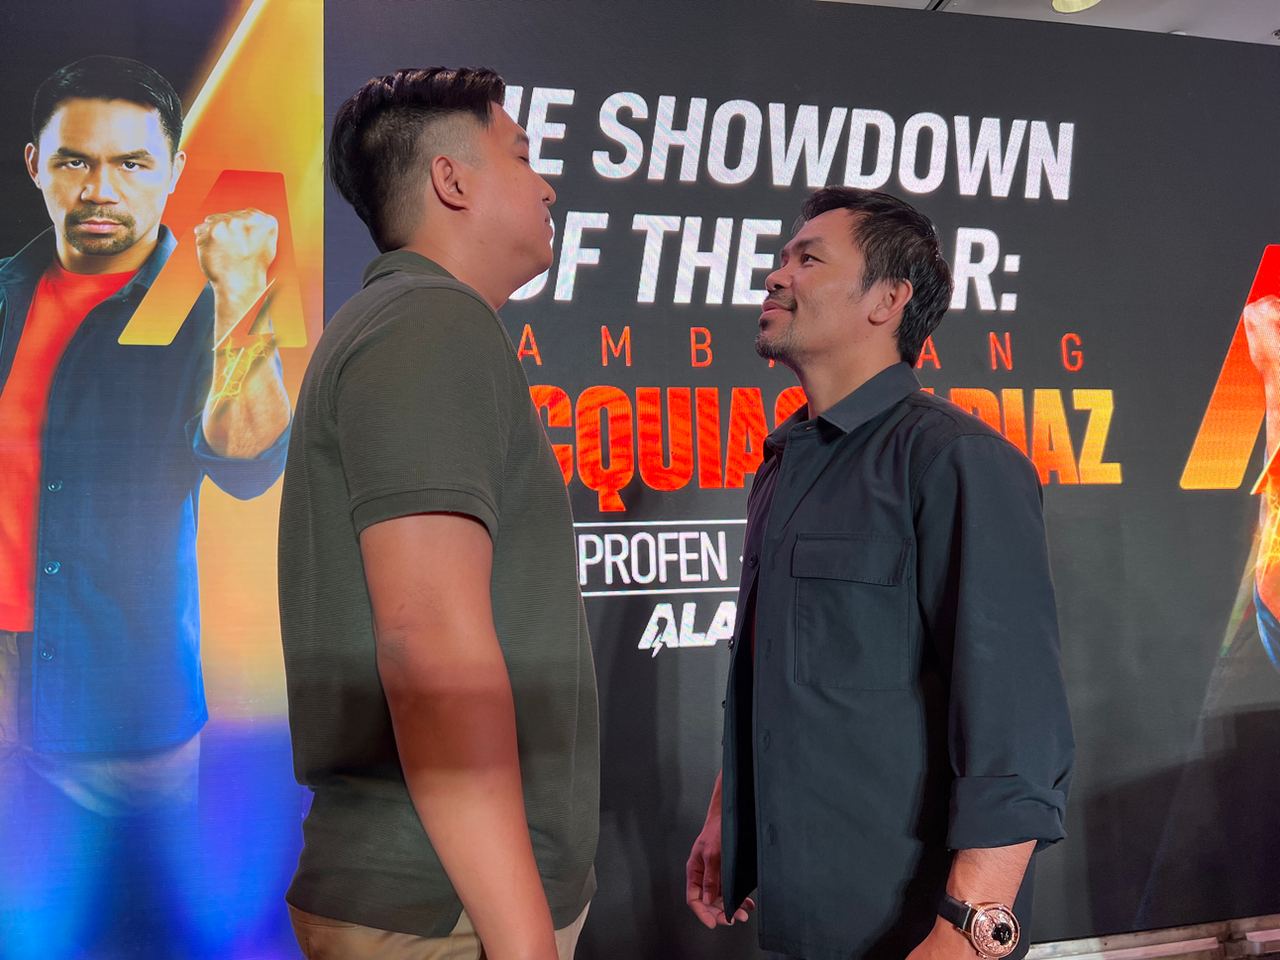 Manny Pacquiao in Alaxan's Showdown of the Year